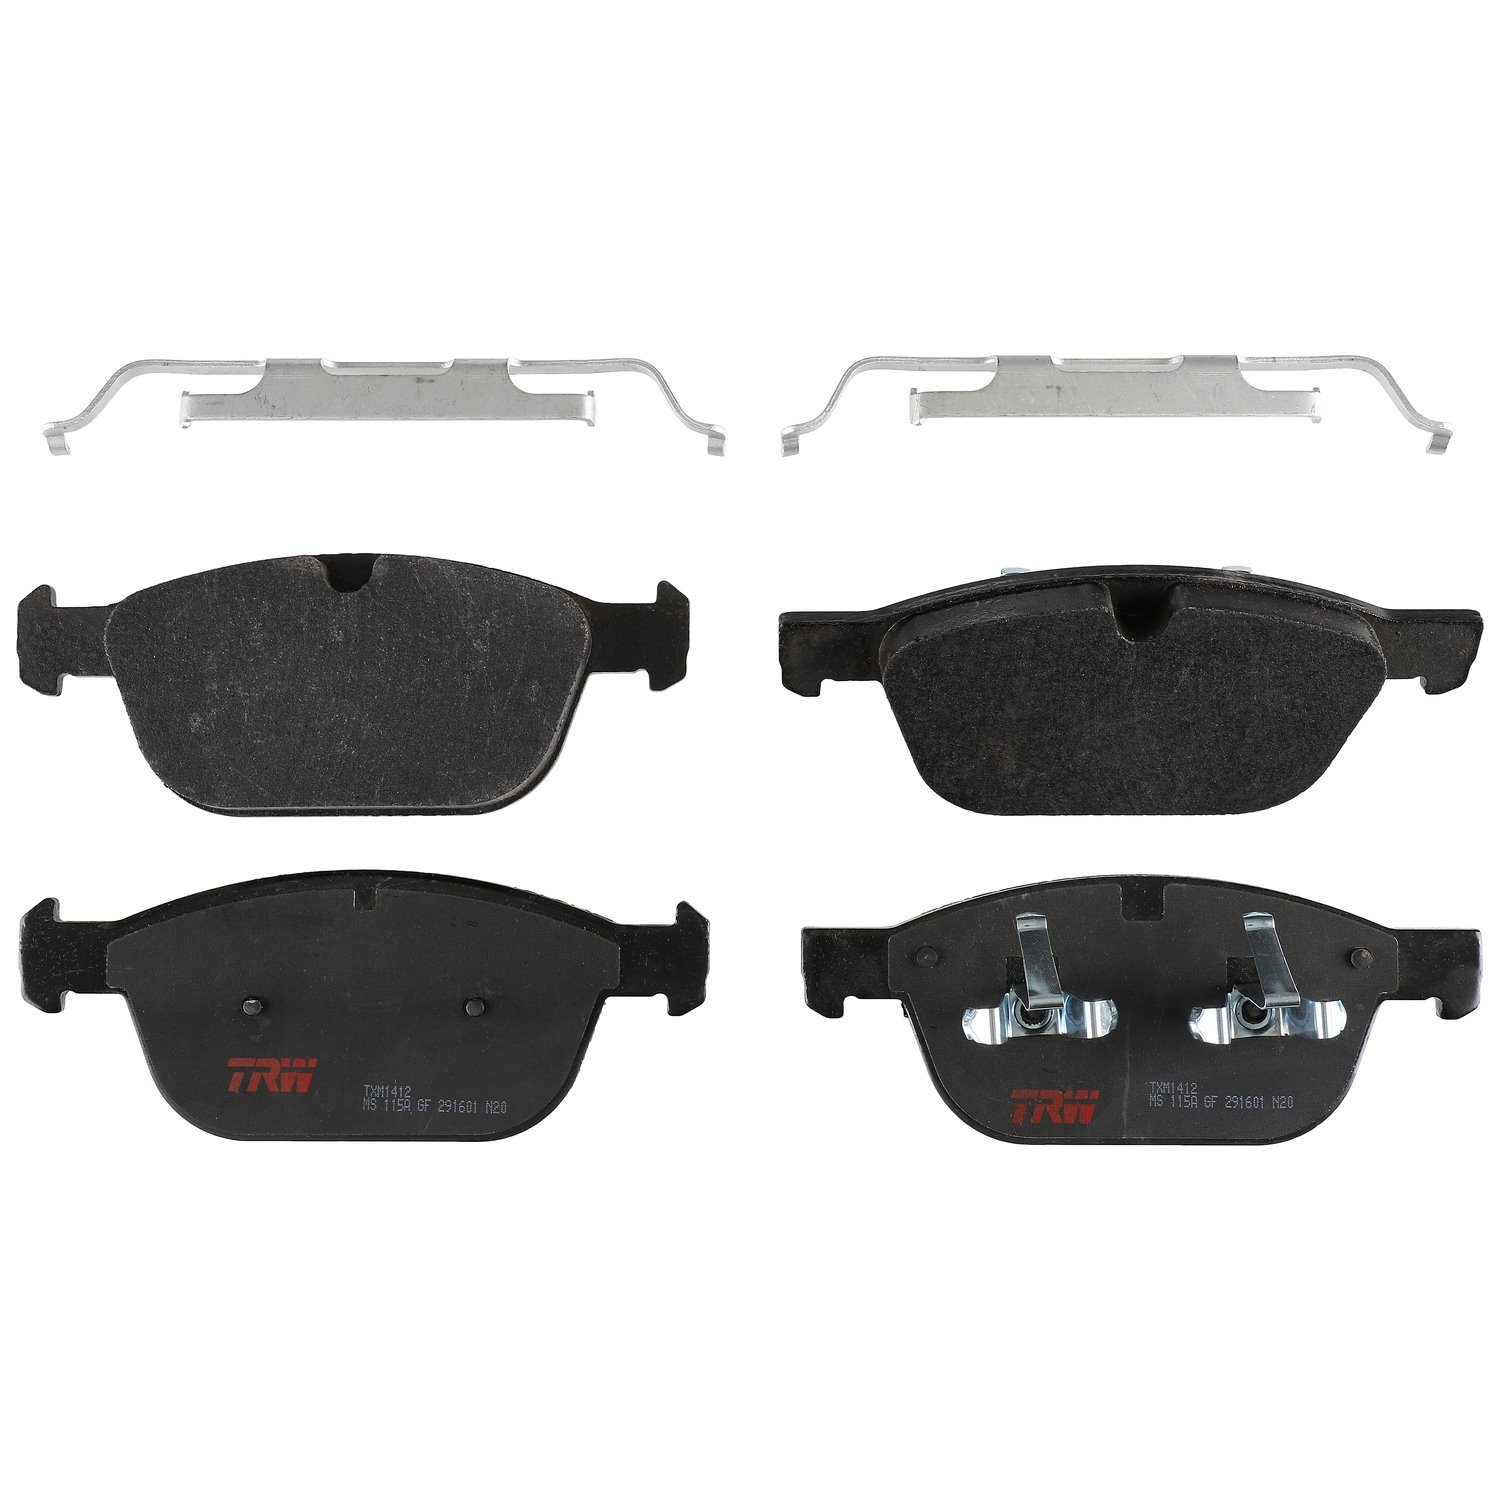 TXM1412 Ultra-Series Disc Brake Pad Set for Volvo XC60 2015-2010, XC90 2014-2010, Position: Front